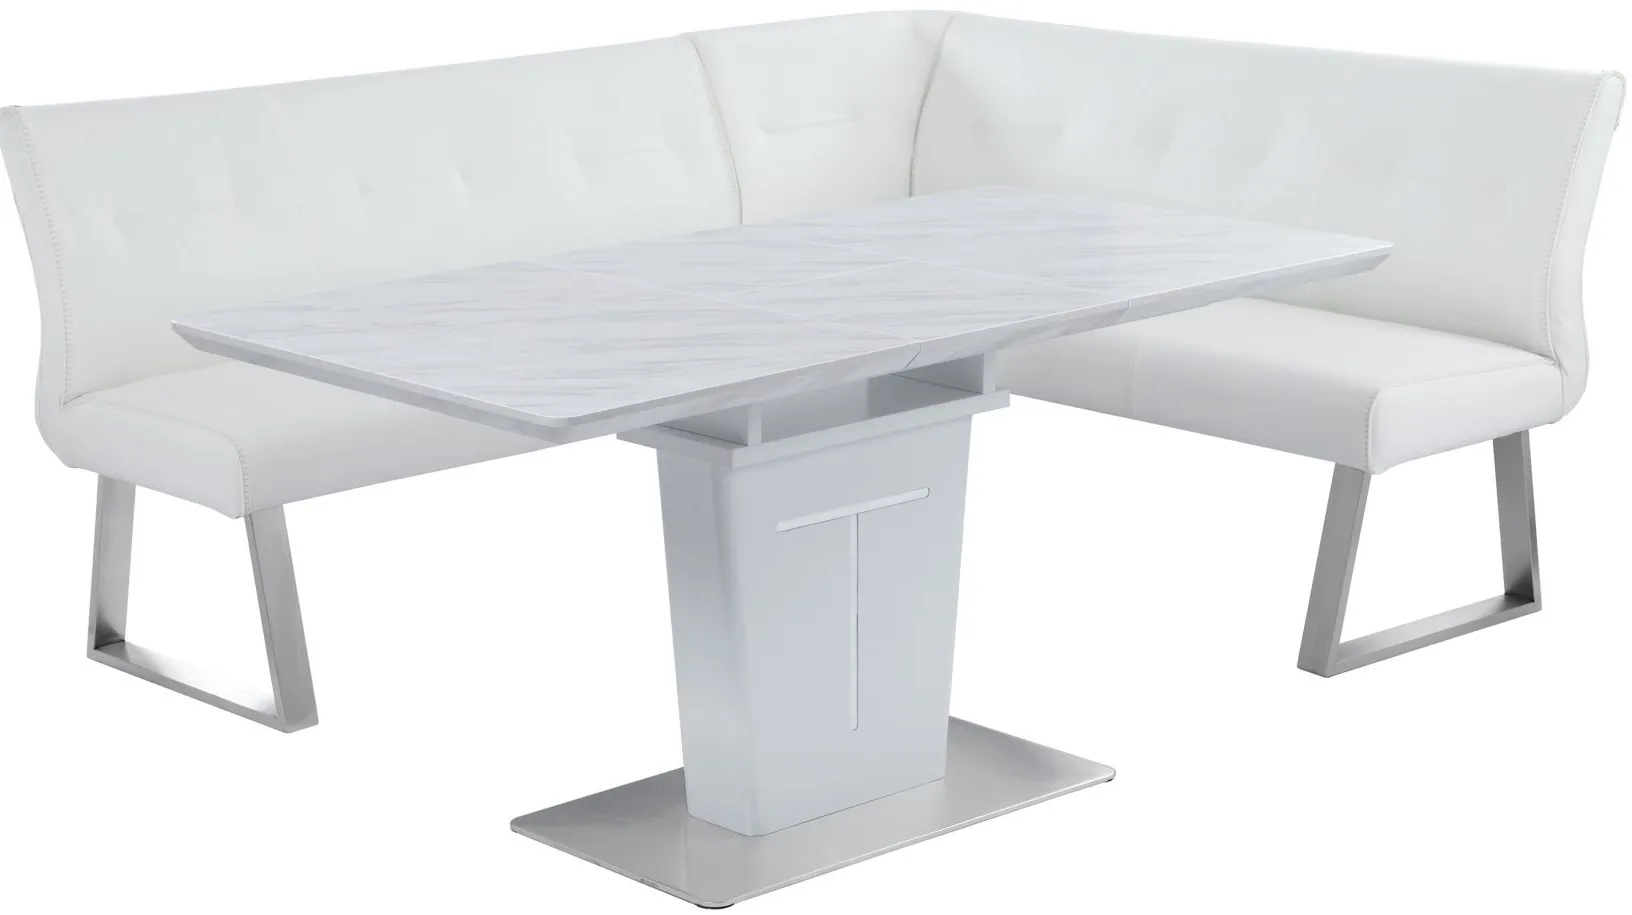 Gwen 2-pc. Dining Set in White by Chintaly Imports